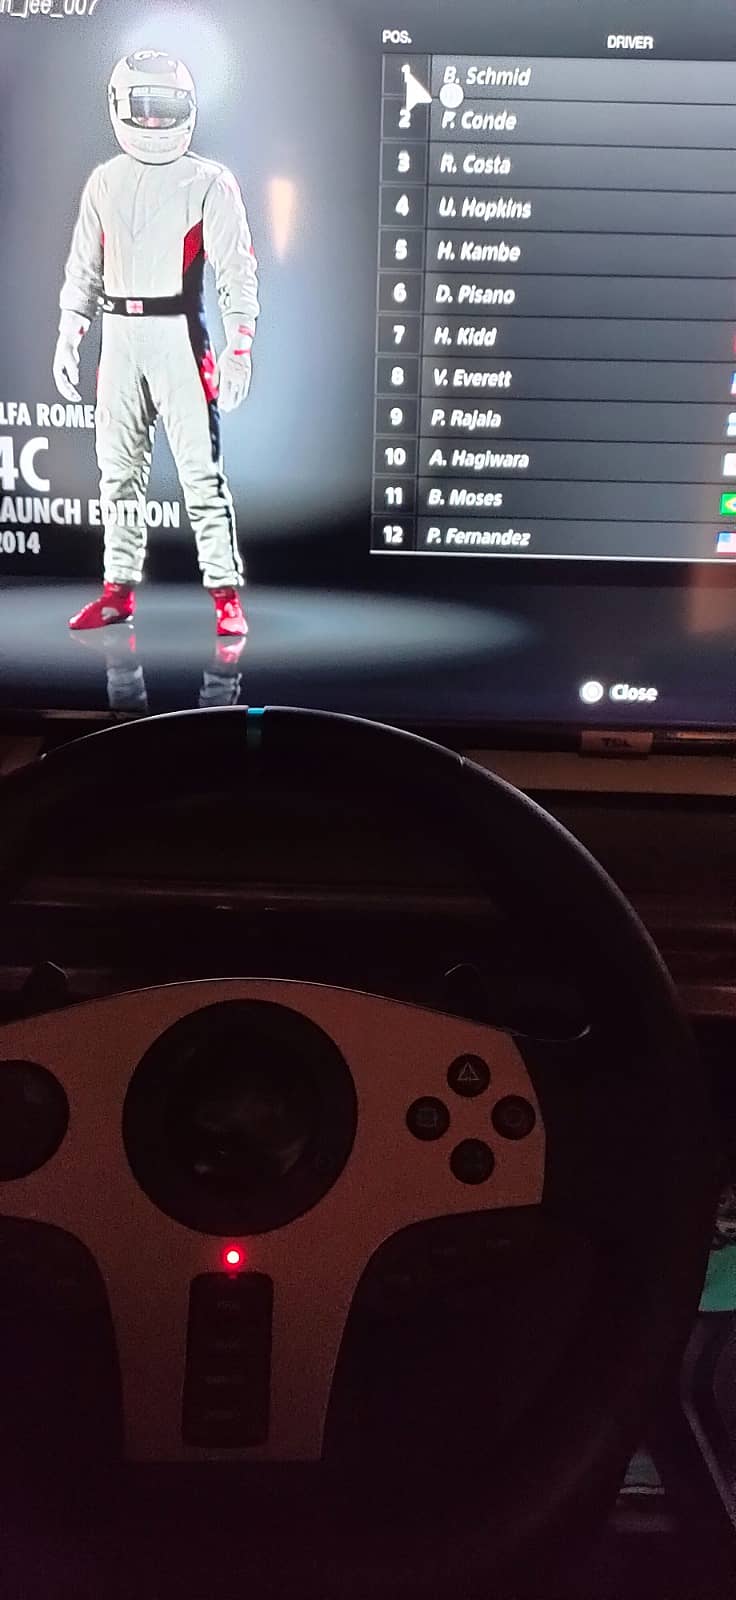 PS4 / PS4 VR / PS4 Games / Steering Wheel 8